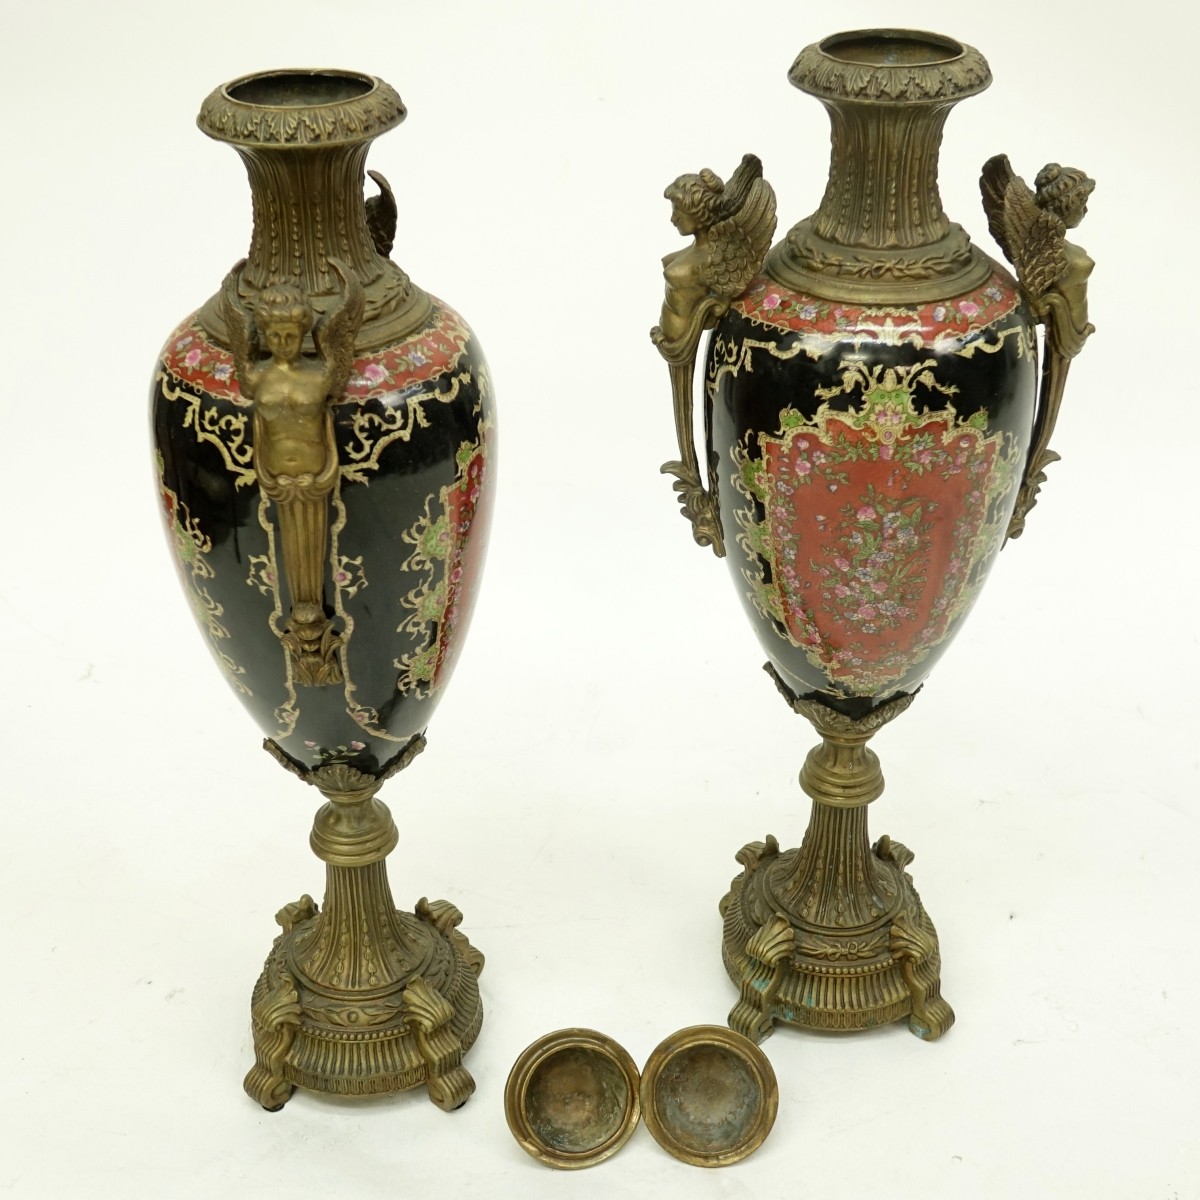 Pair of 20th Century Bronze and Porcelain Urns